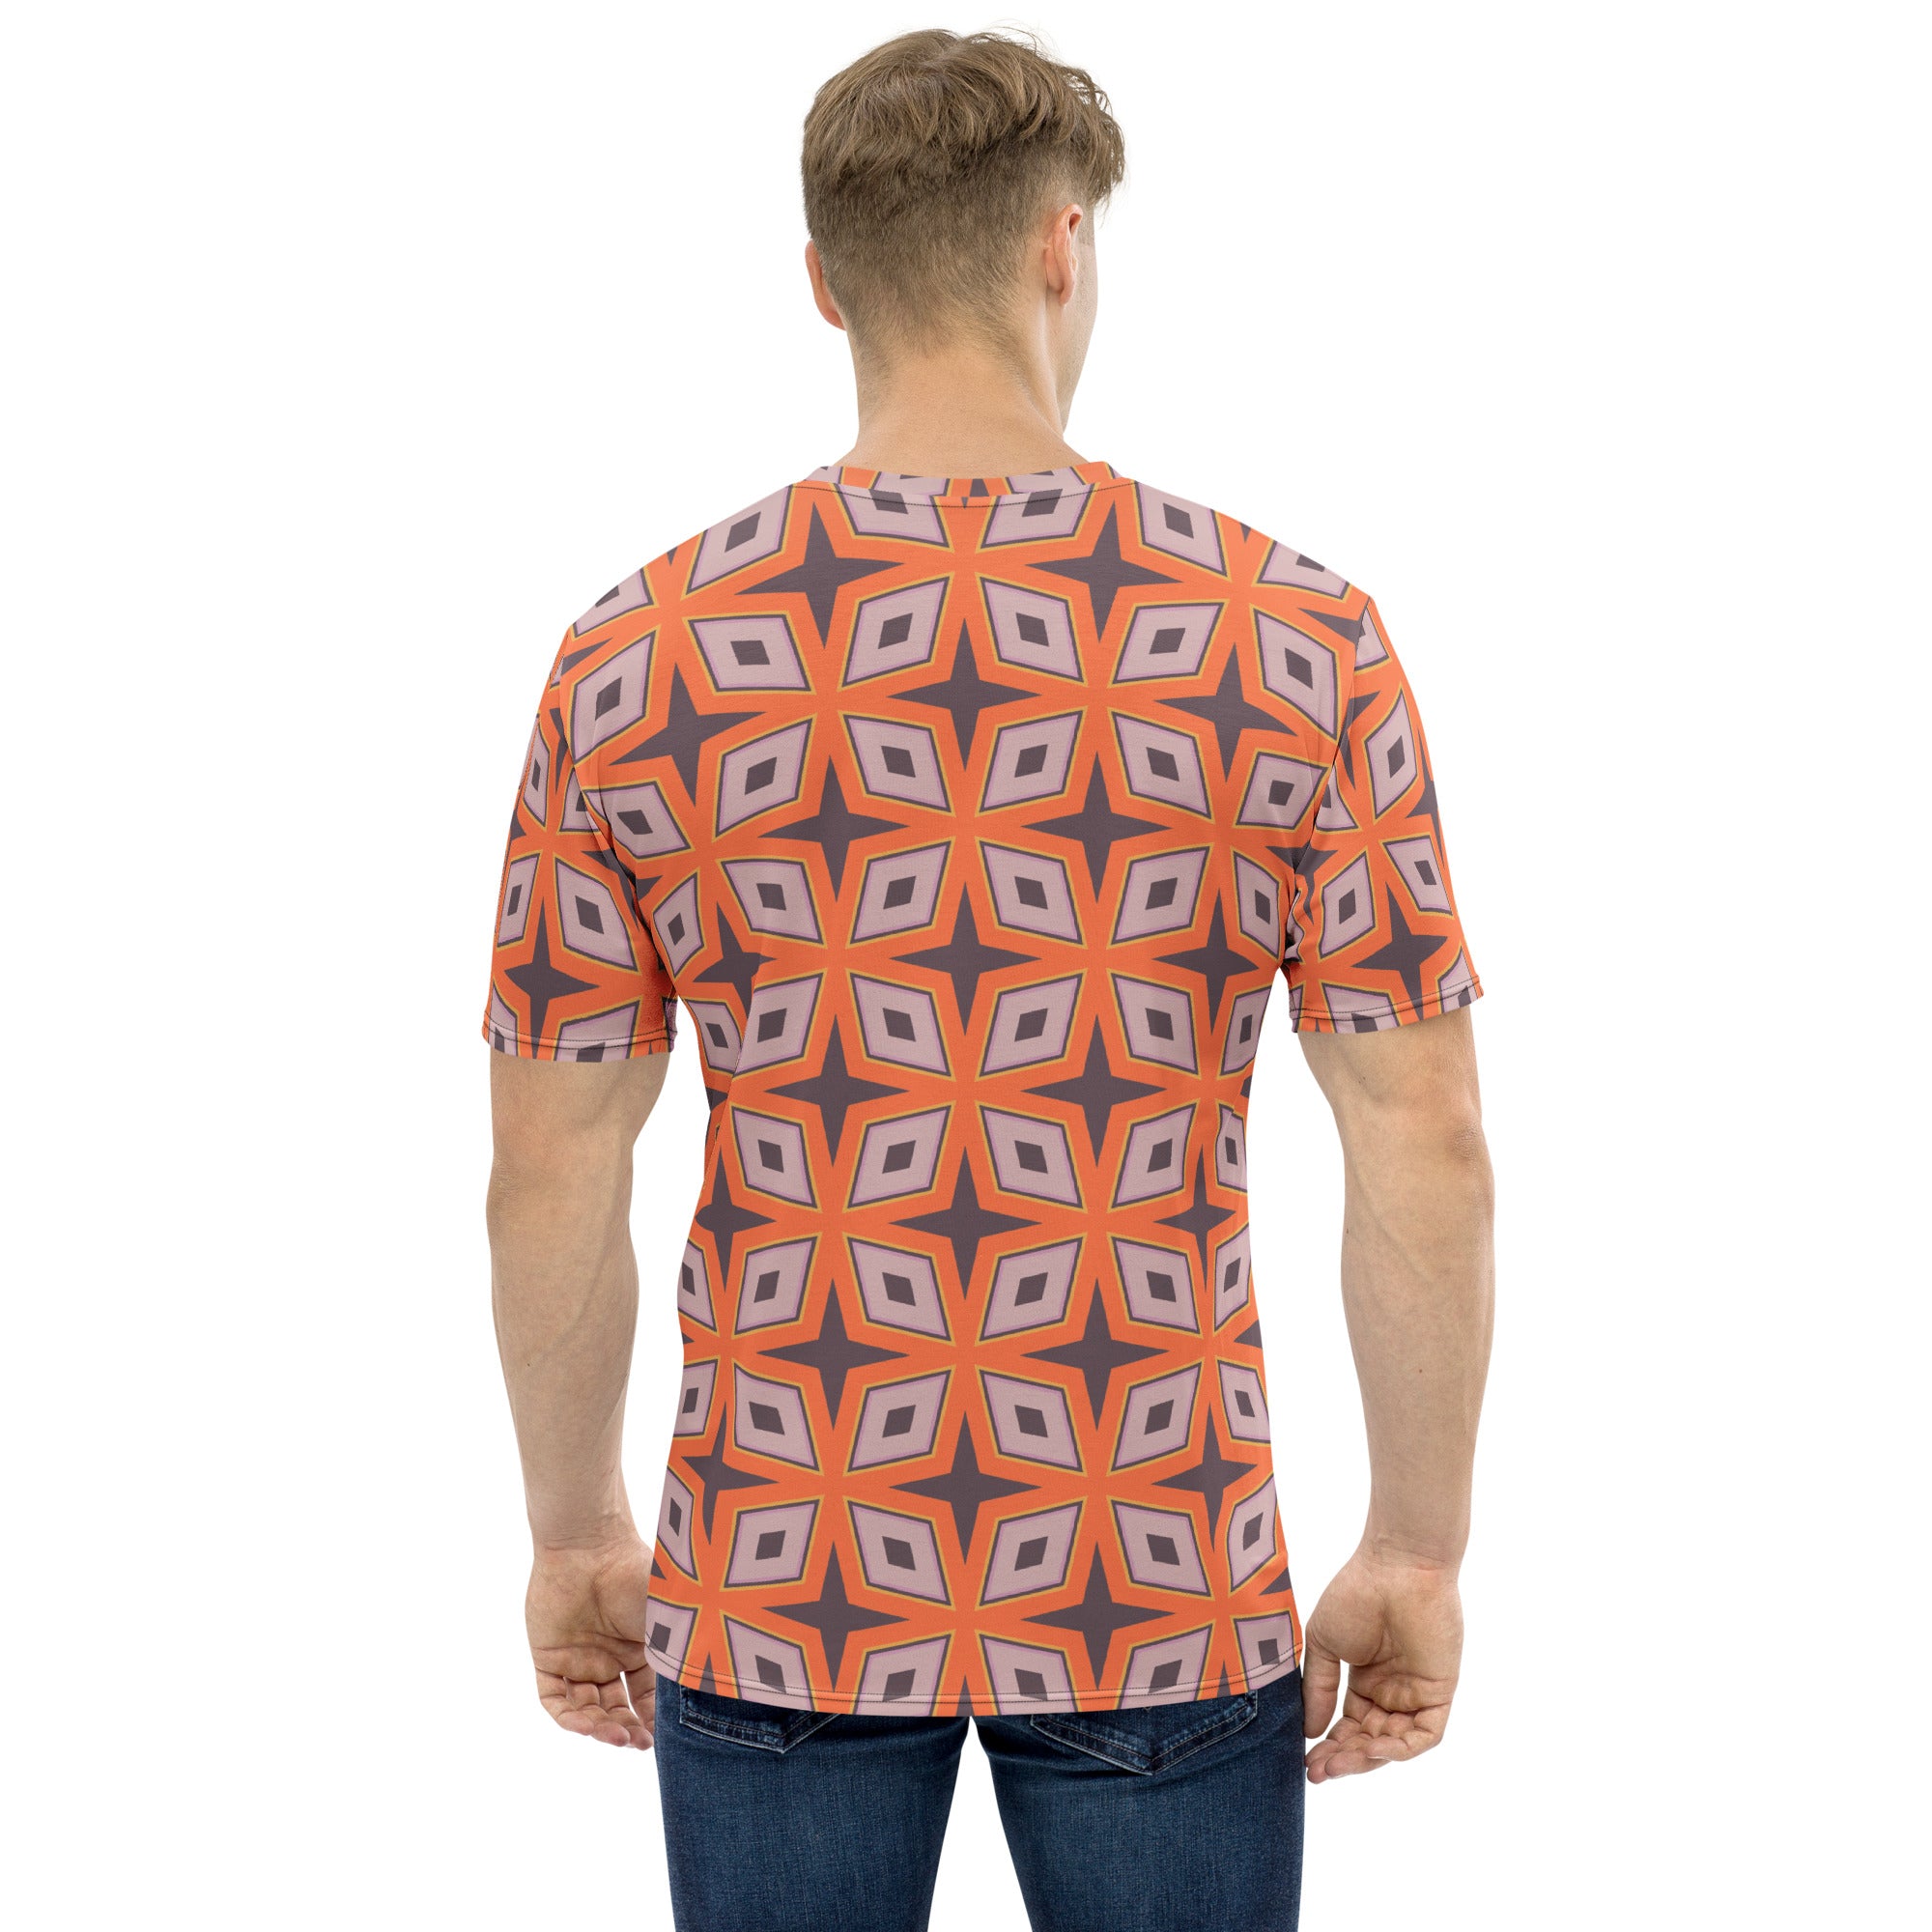 Stylish men's tee with tapestry design.